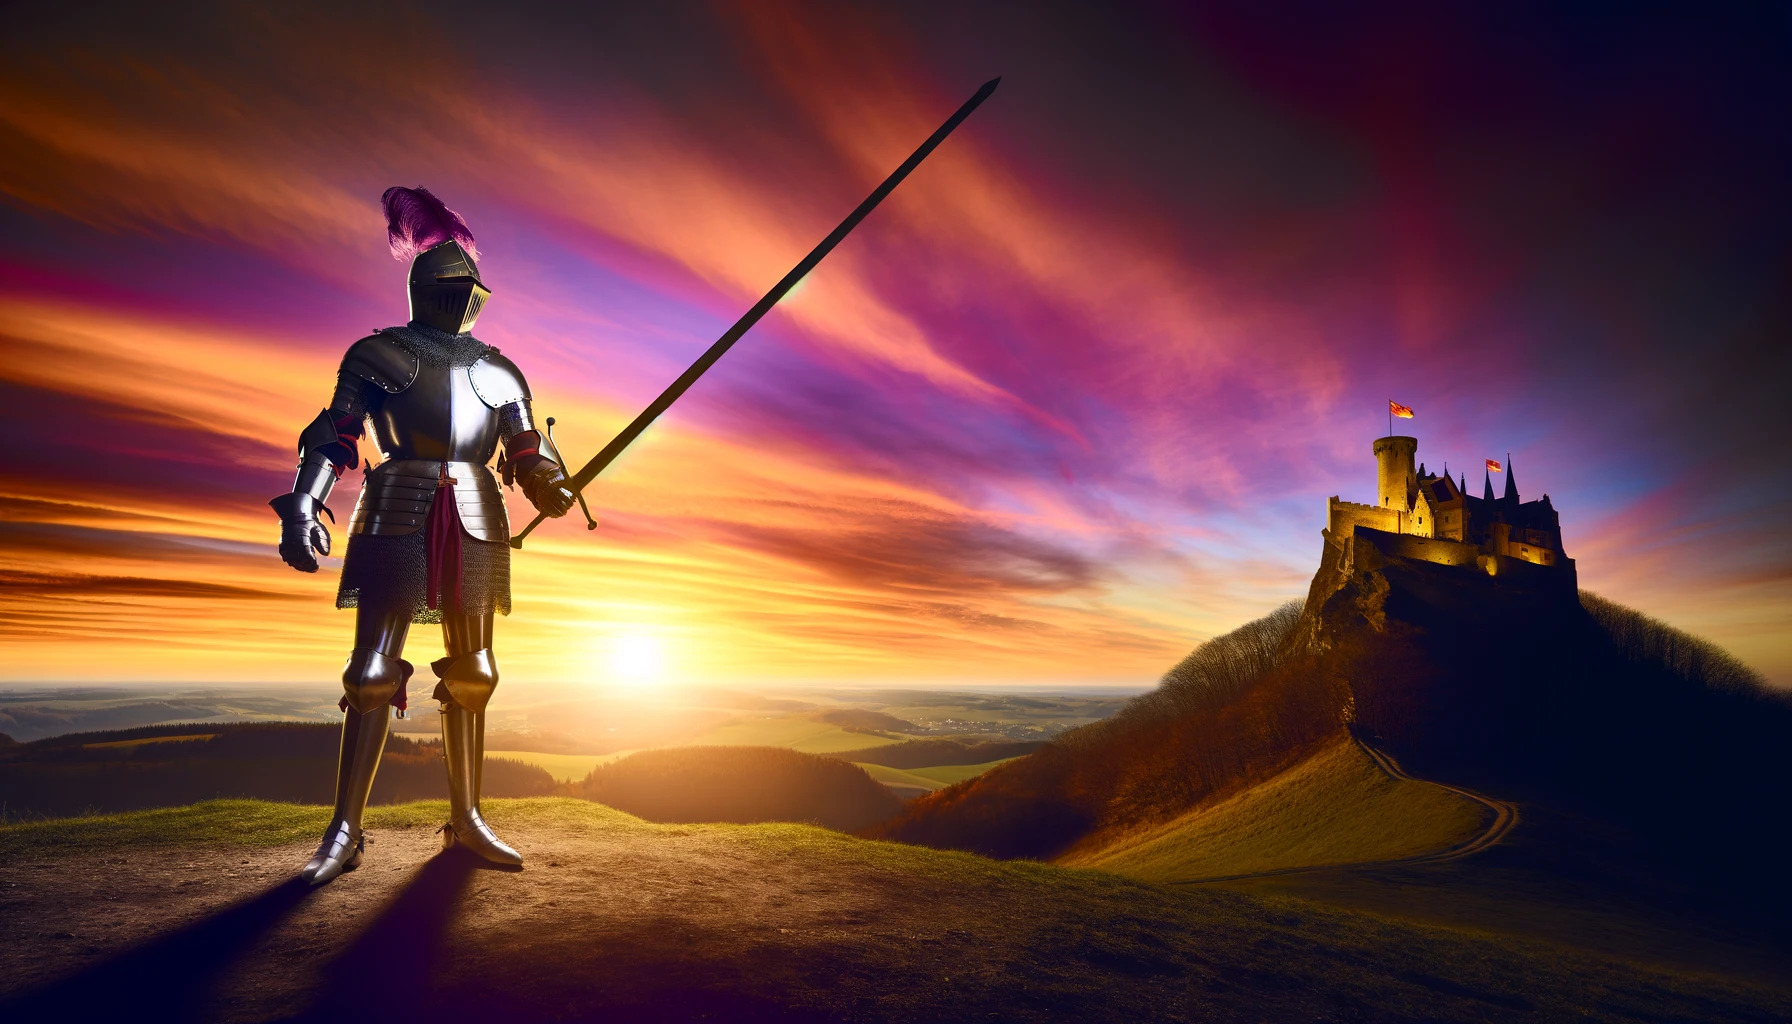 Here's a cinematic image inspired by knightly valor and medieval epics, capturing the essence of chivalry and adventure at a dramatic sunset. Let the scene transport you to a time of noble quests and grand castles.